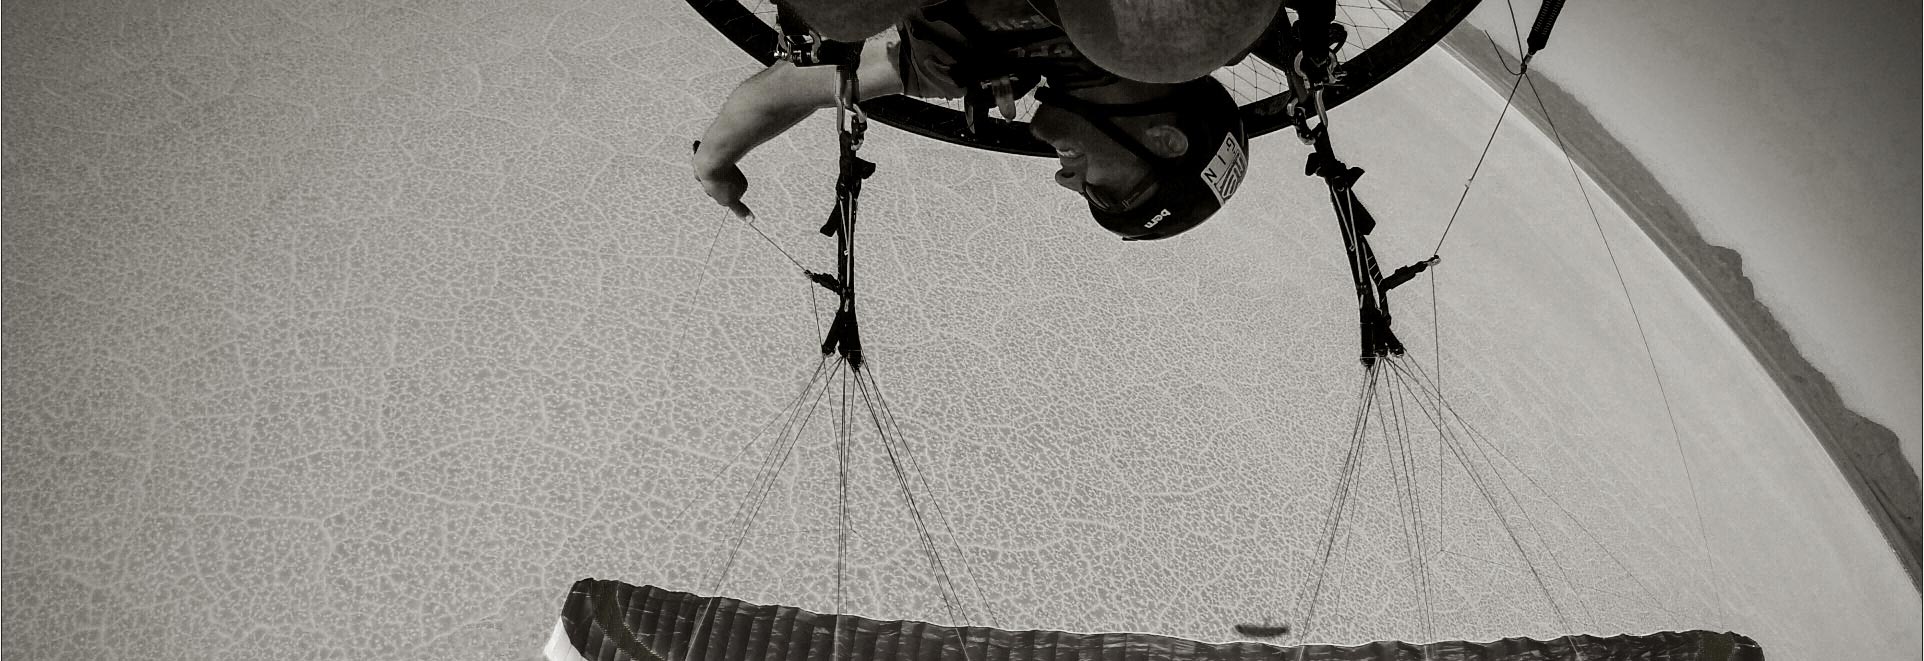 scout-carbon-paramotor-wing-over-salt-flats-california-1920-660-black-and-white